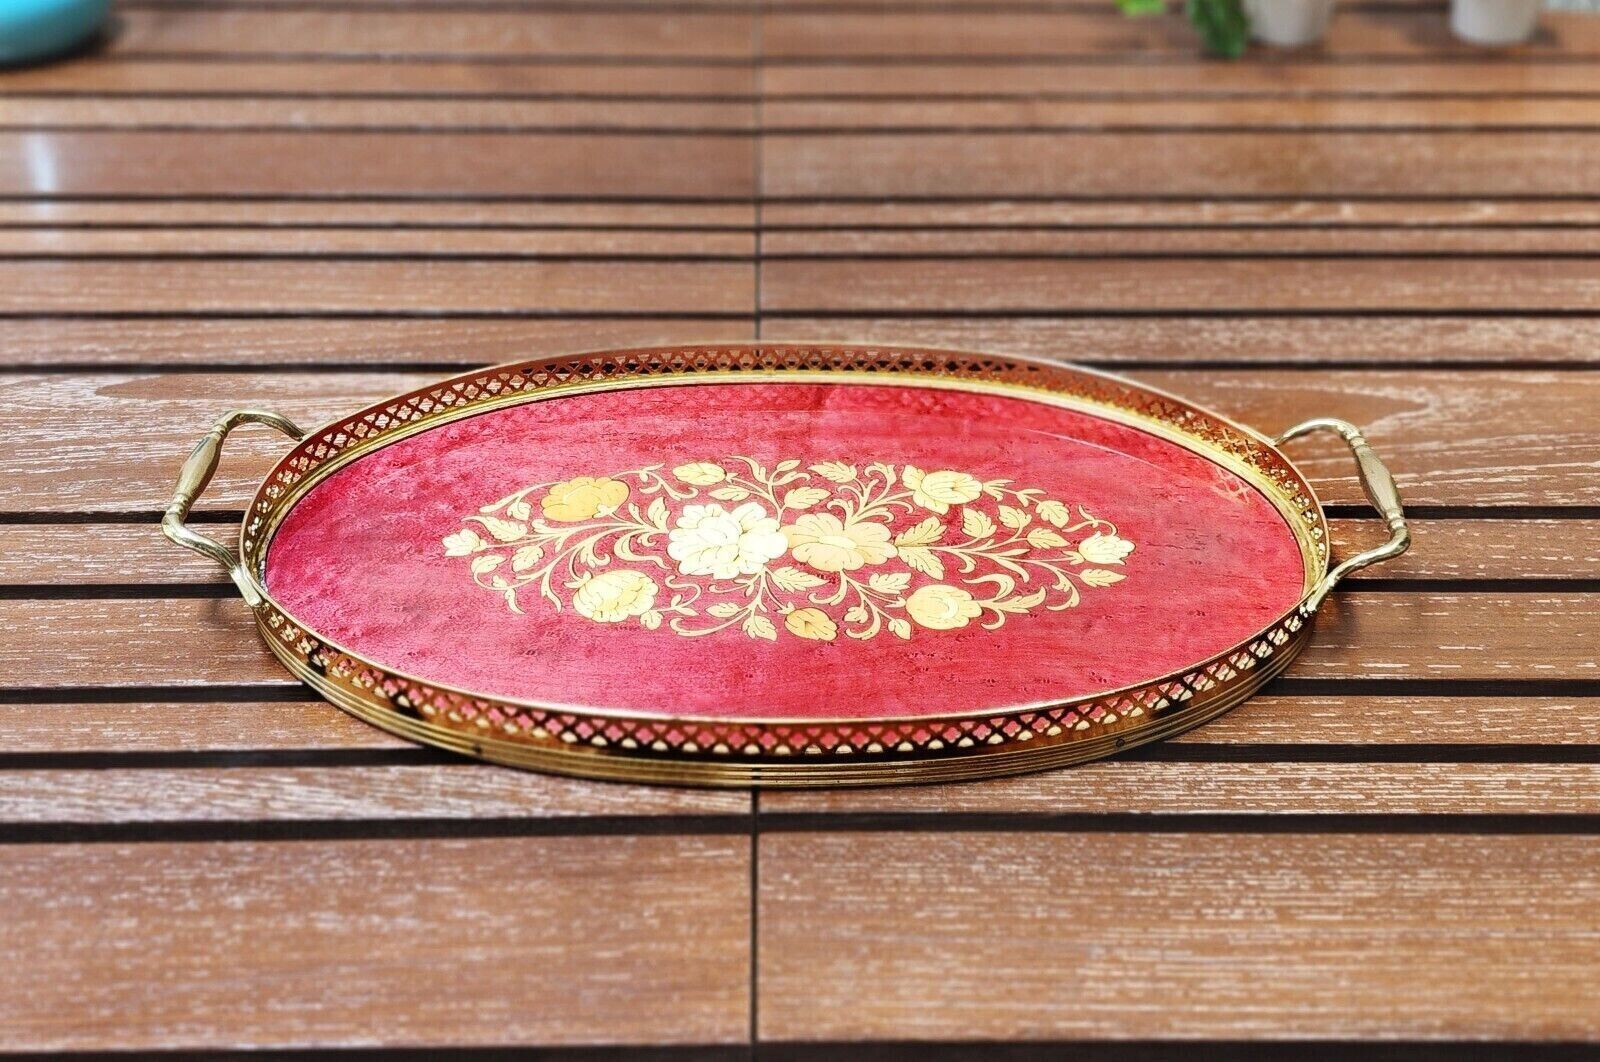 18 Large Vintage Brass Bamboo Round Tray With Handles Antique Display Tray  Ornate Gold Metal Vanity Mid Century Gallery Serving Tray MCM -  Canada